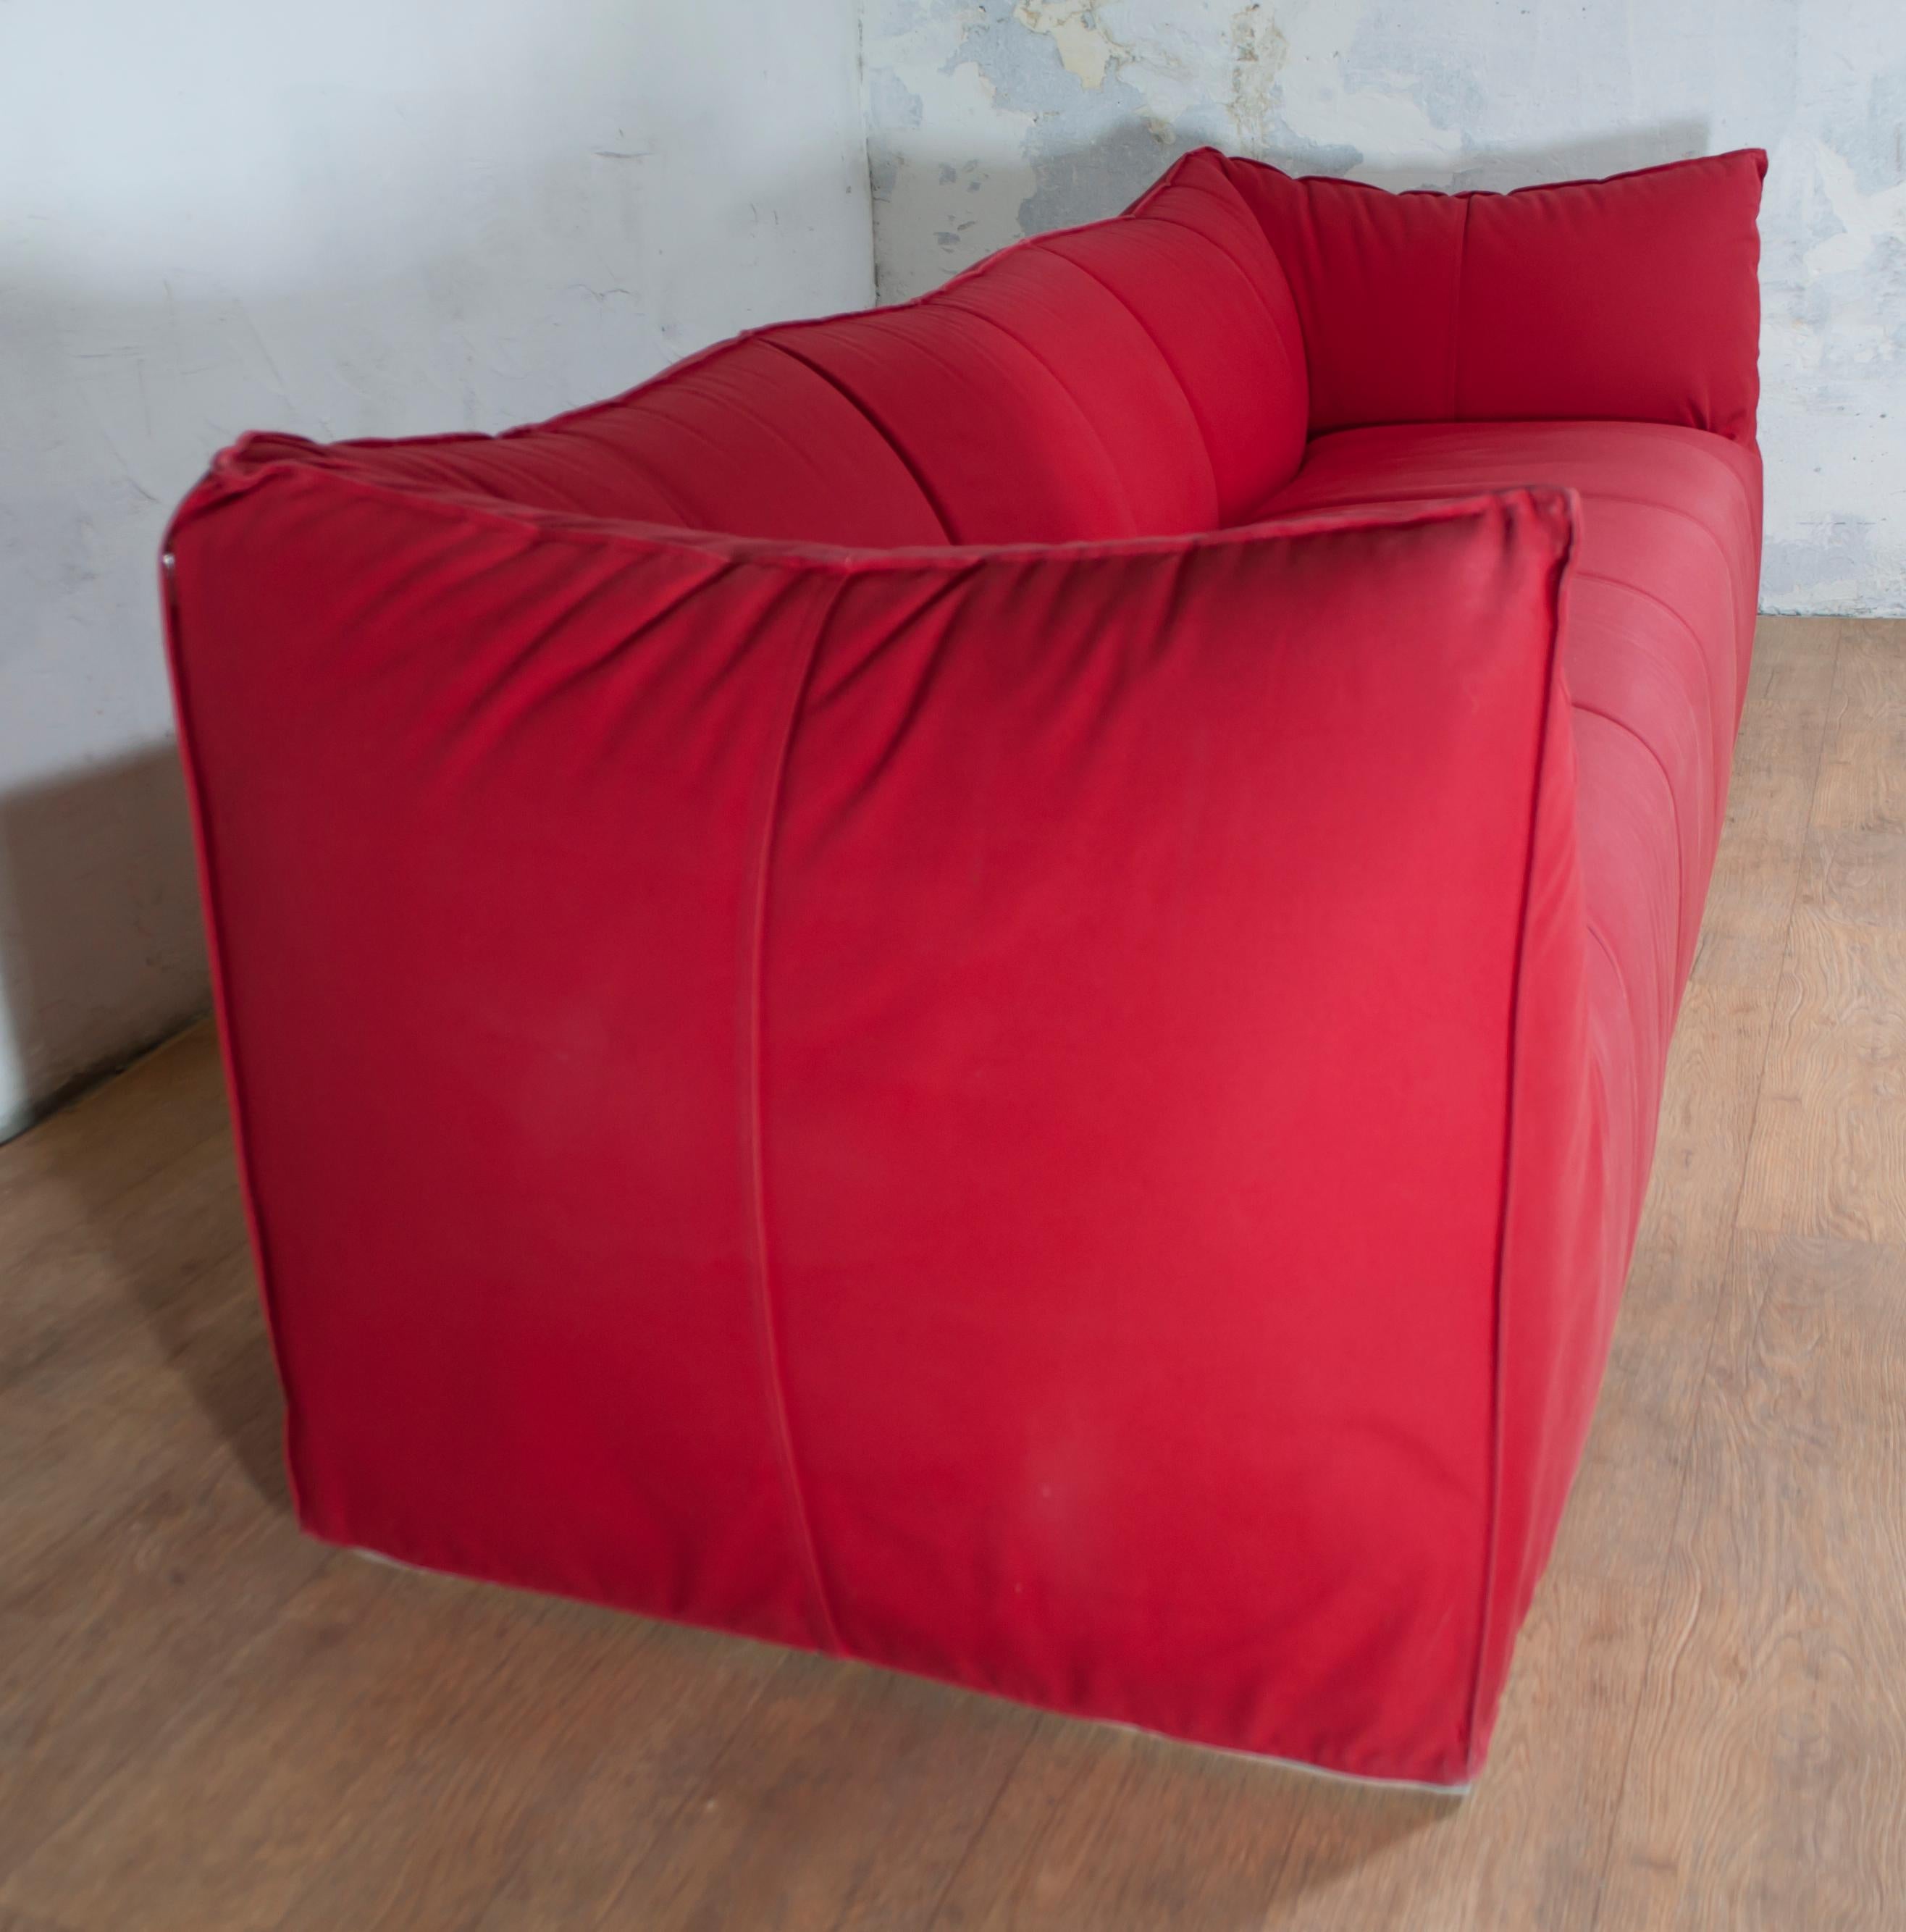 Late 20th Century Mario Bellini Sofa and Pouf Tribambola Red Canvas Lining 